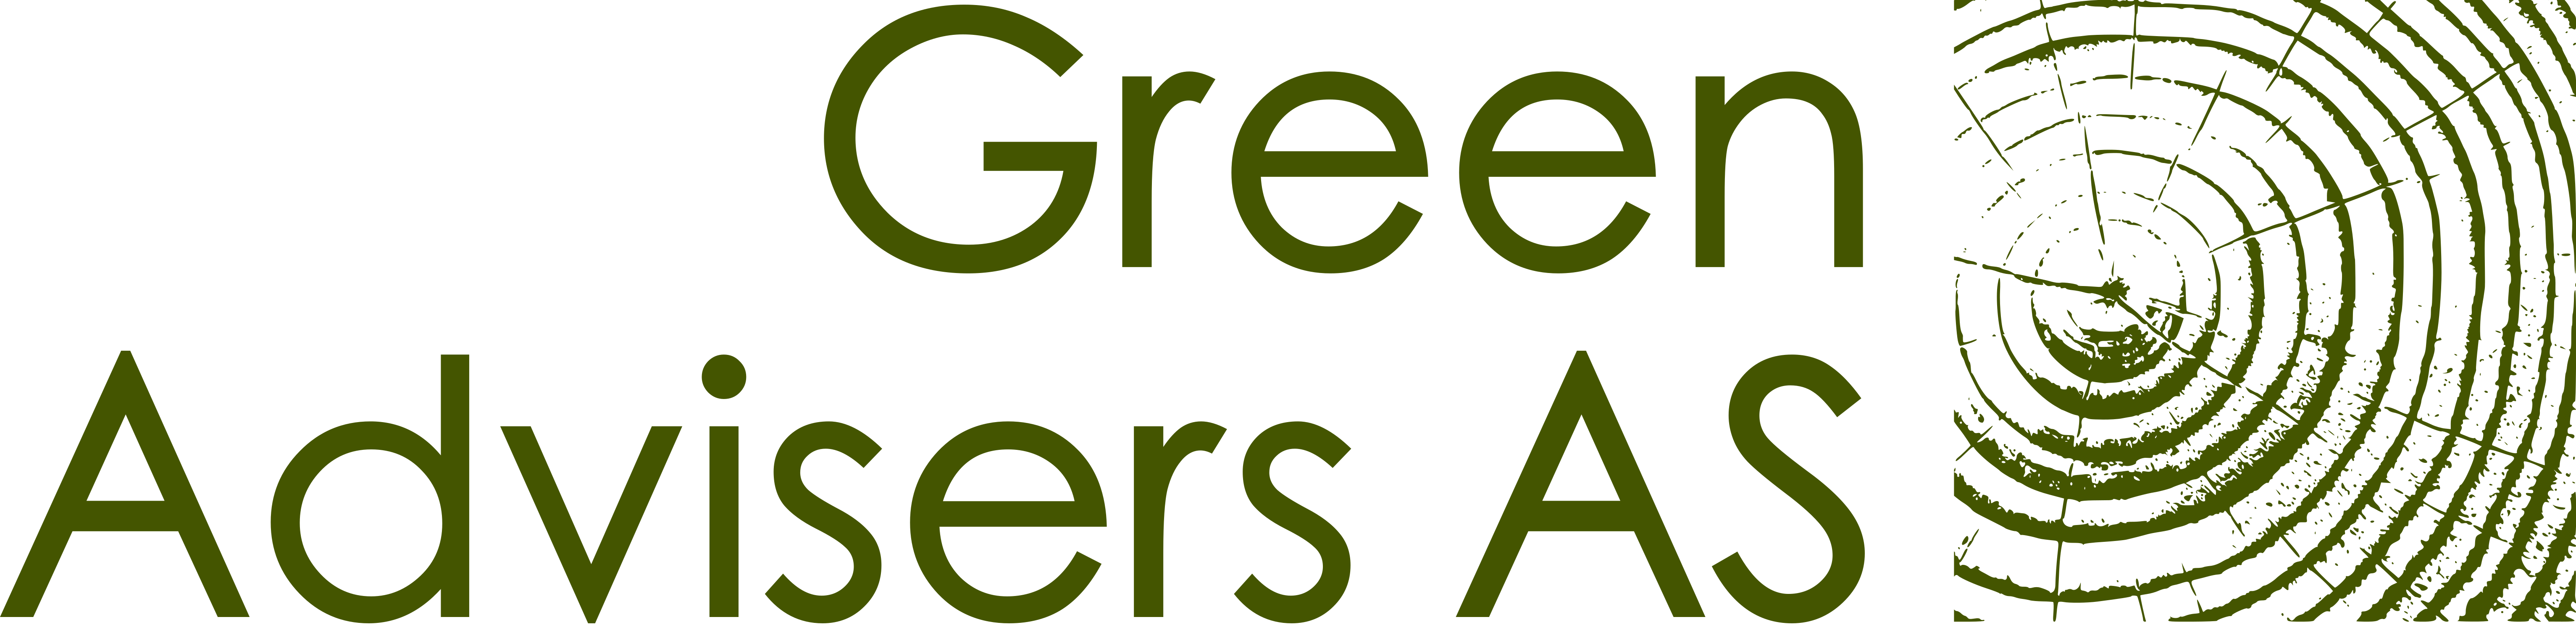 Green Advisers AS